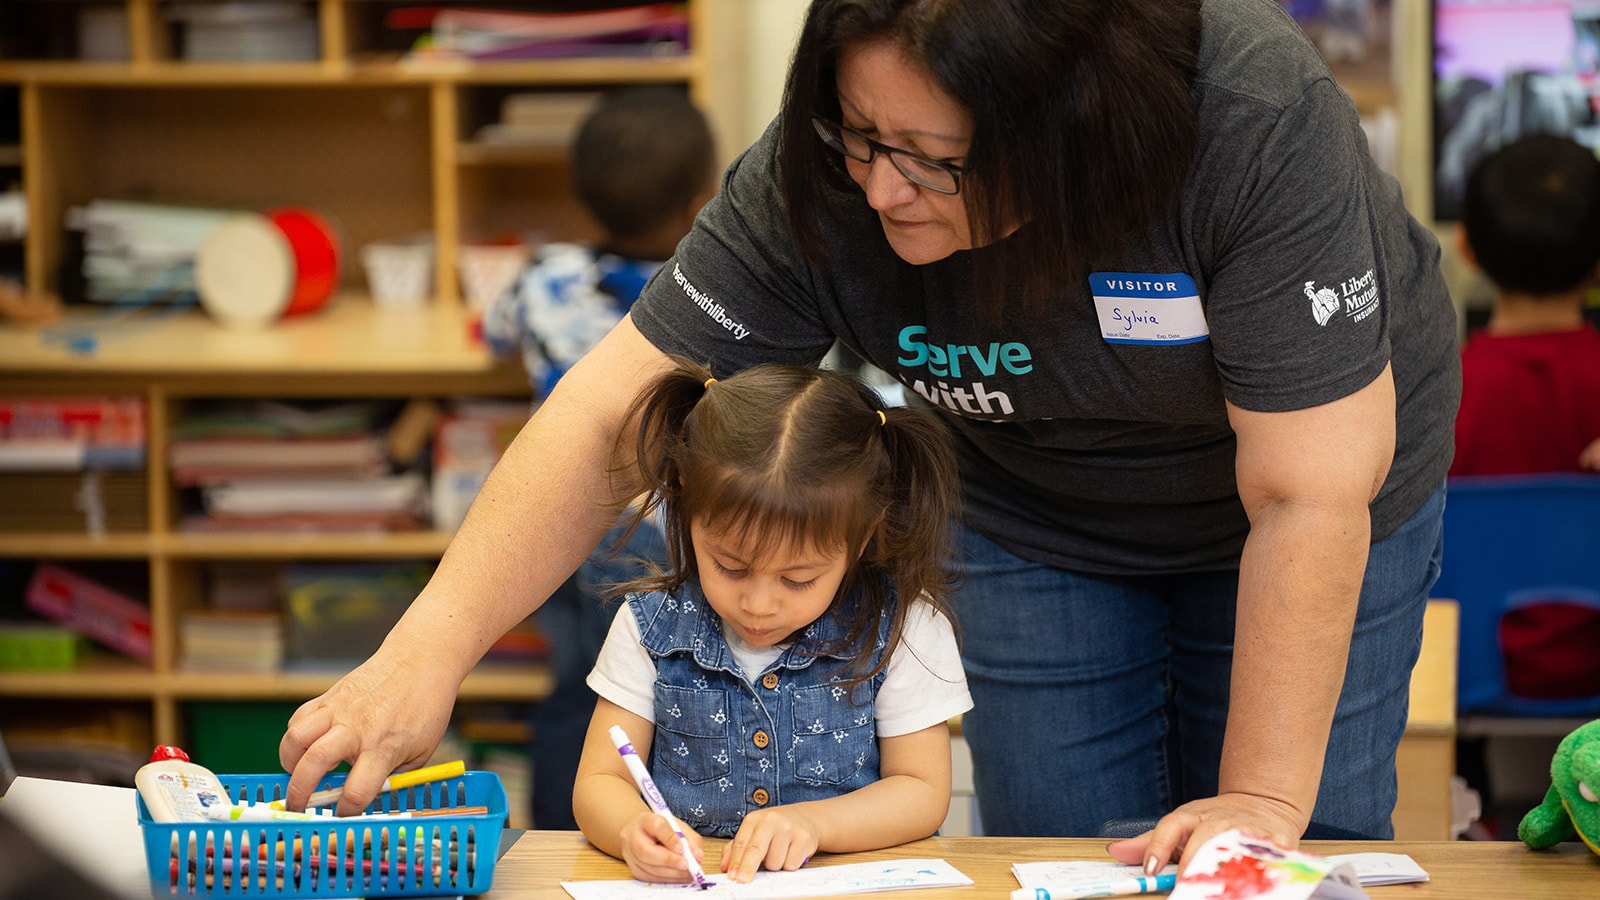 Liberty Mutual Serve Volunteer helping a young child color